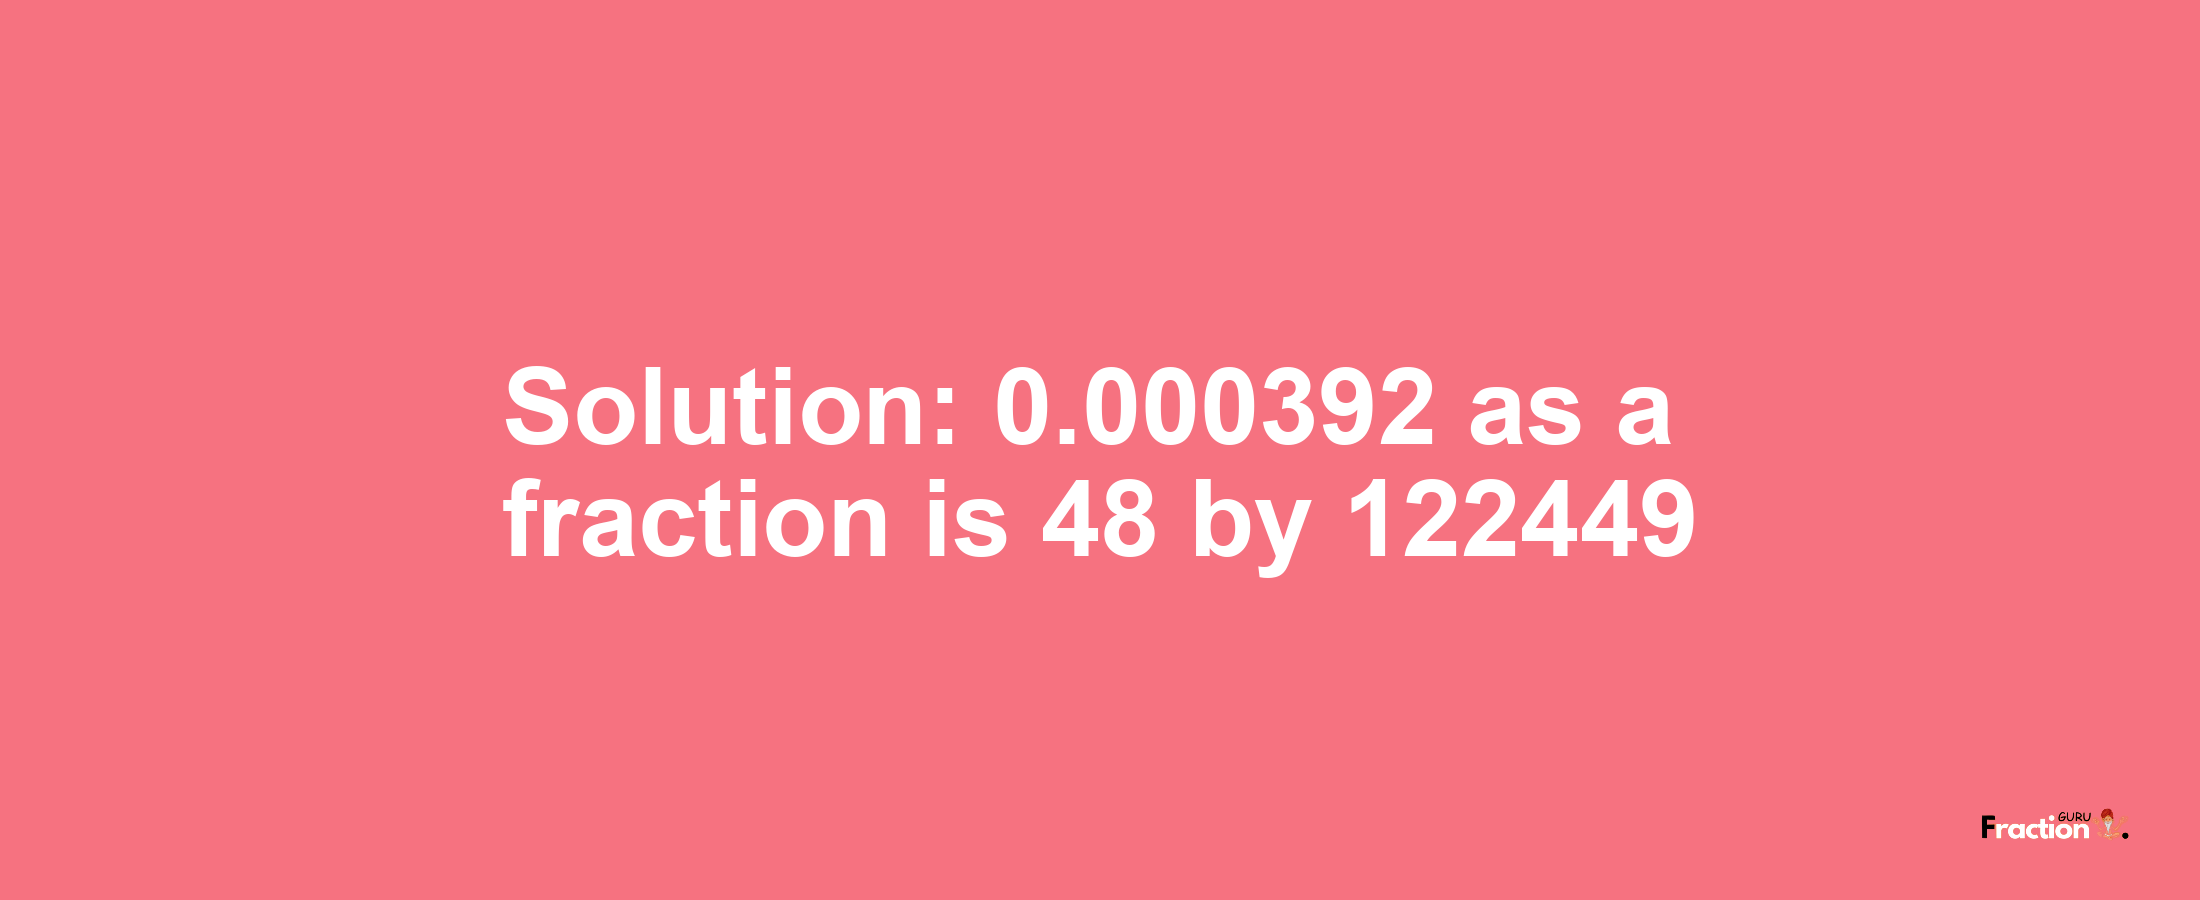 Solution:0.000392 as a fraction is 48/122449